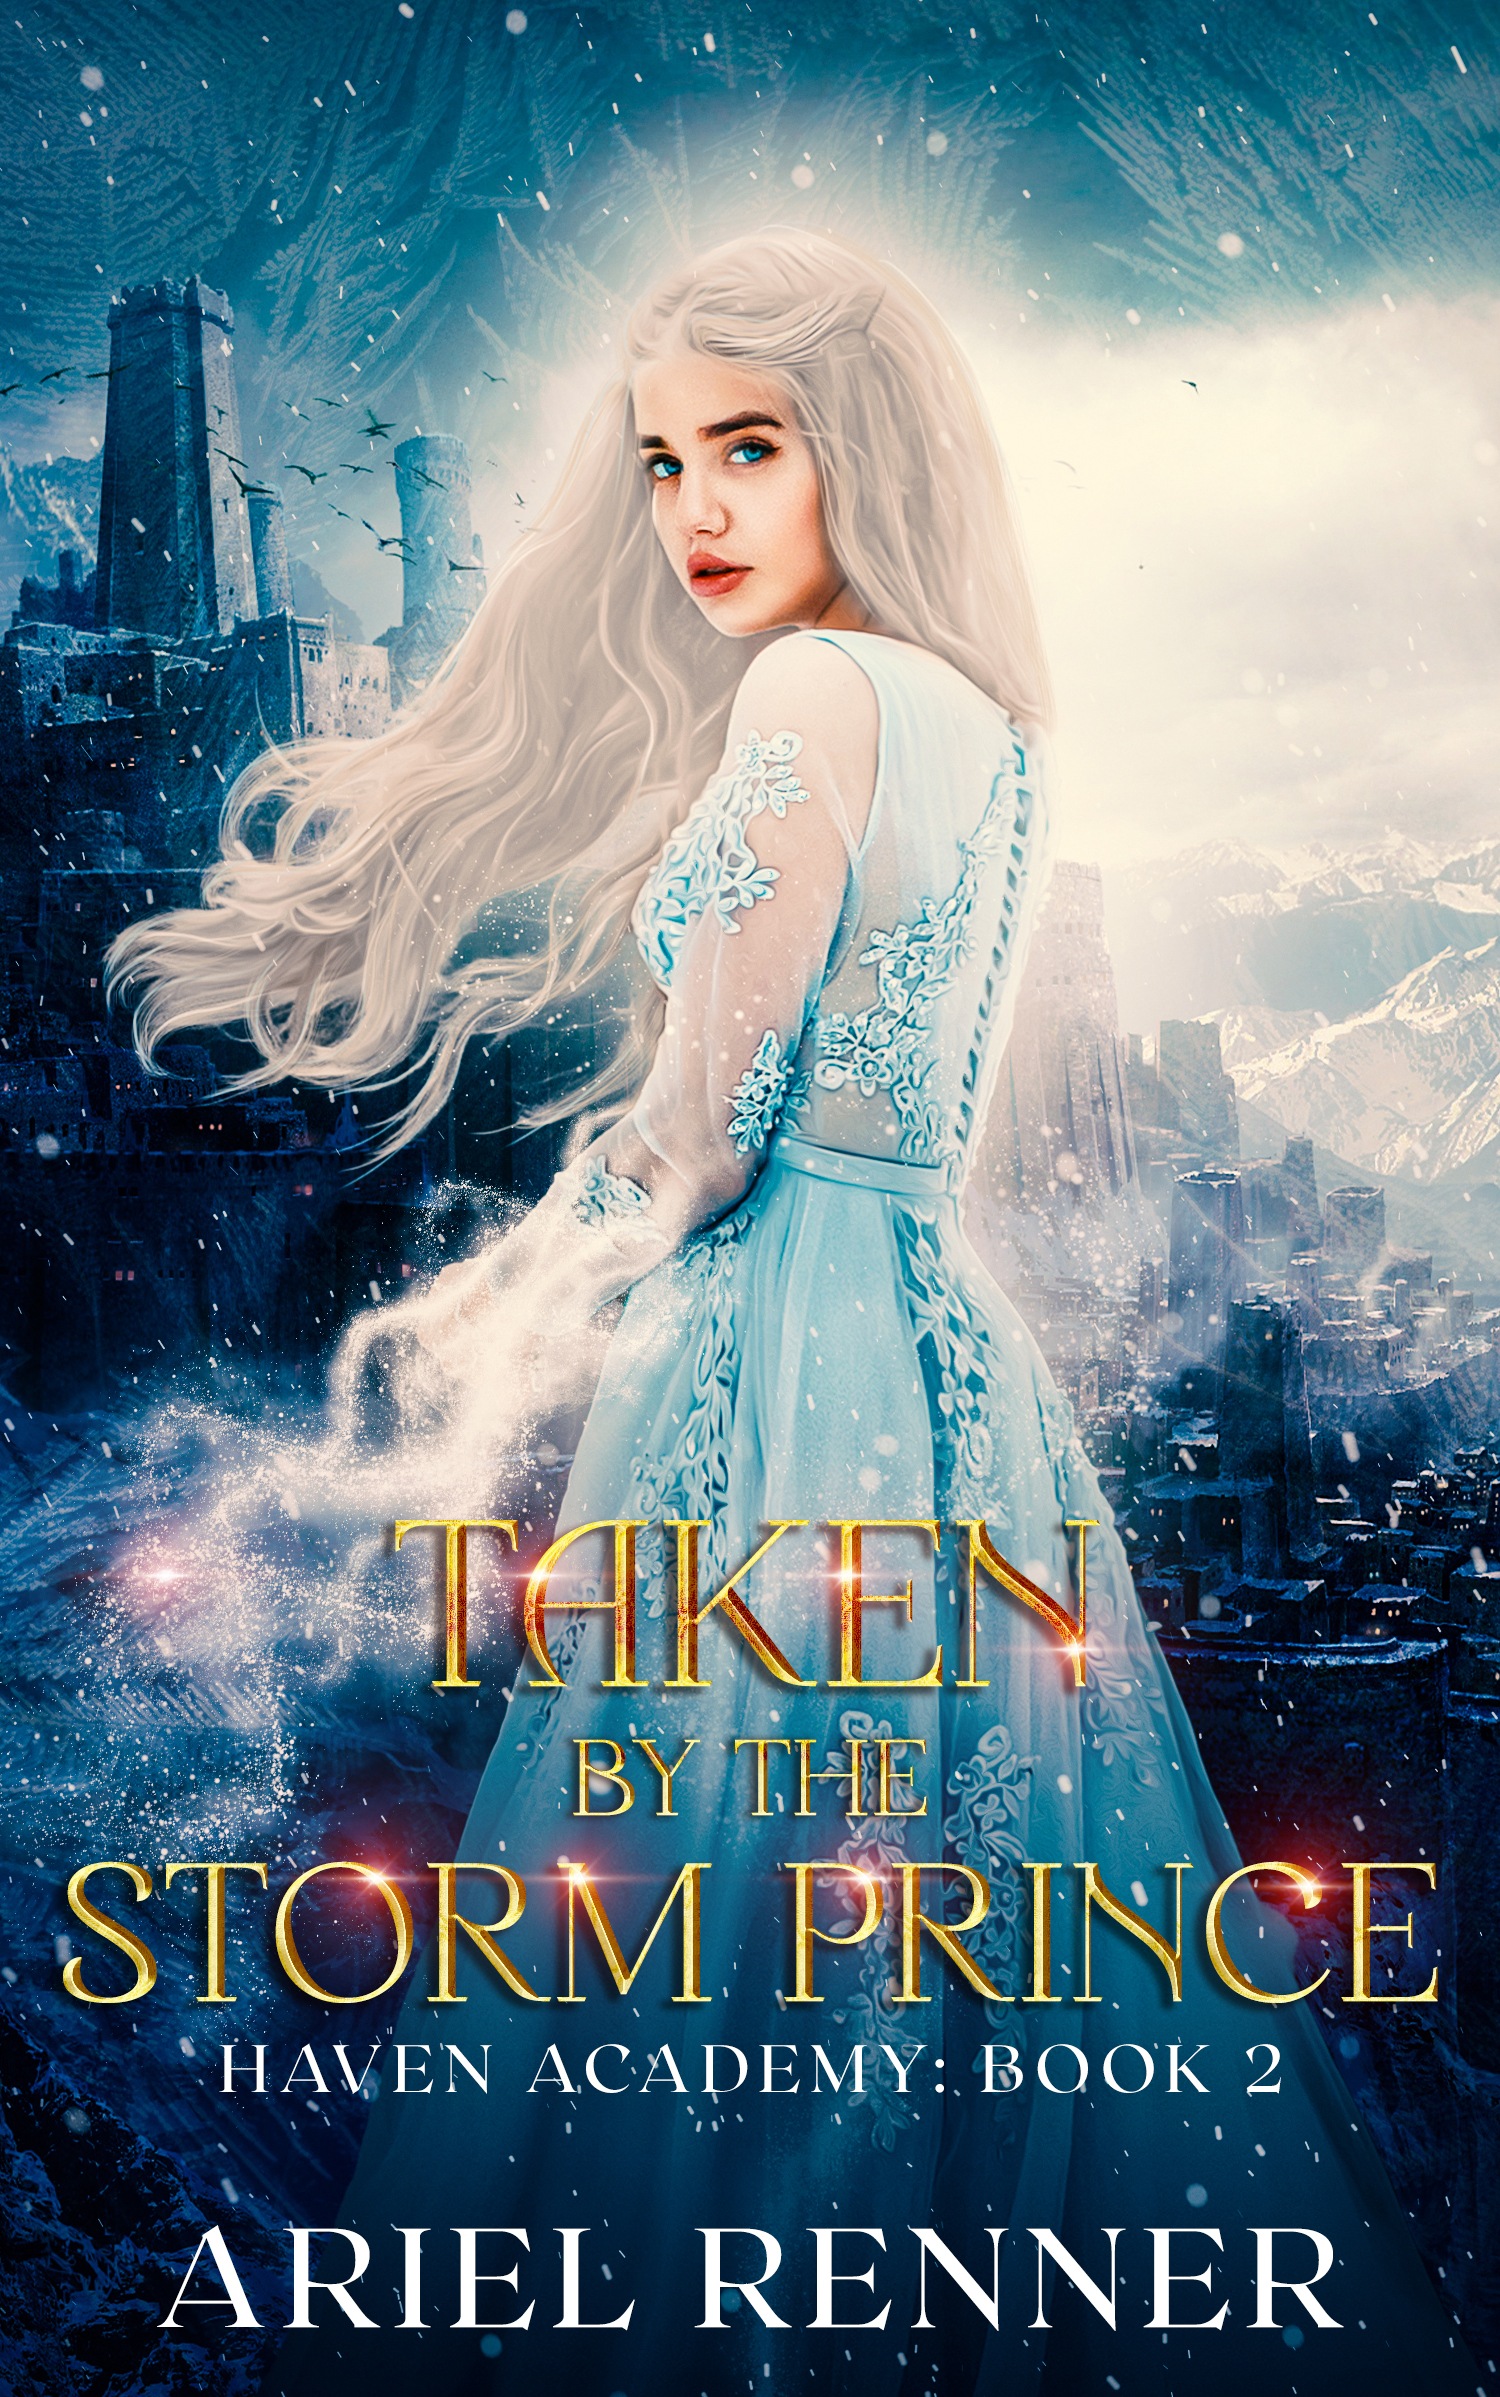 Taken by the Storm Prince - Ariel Renner